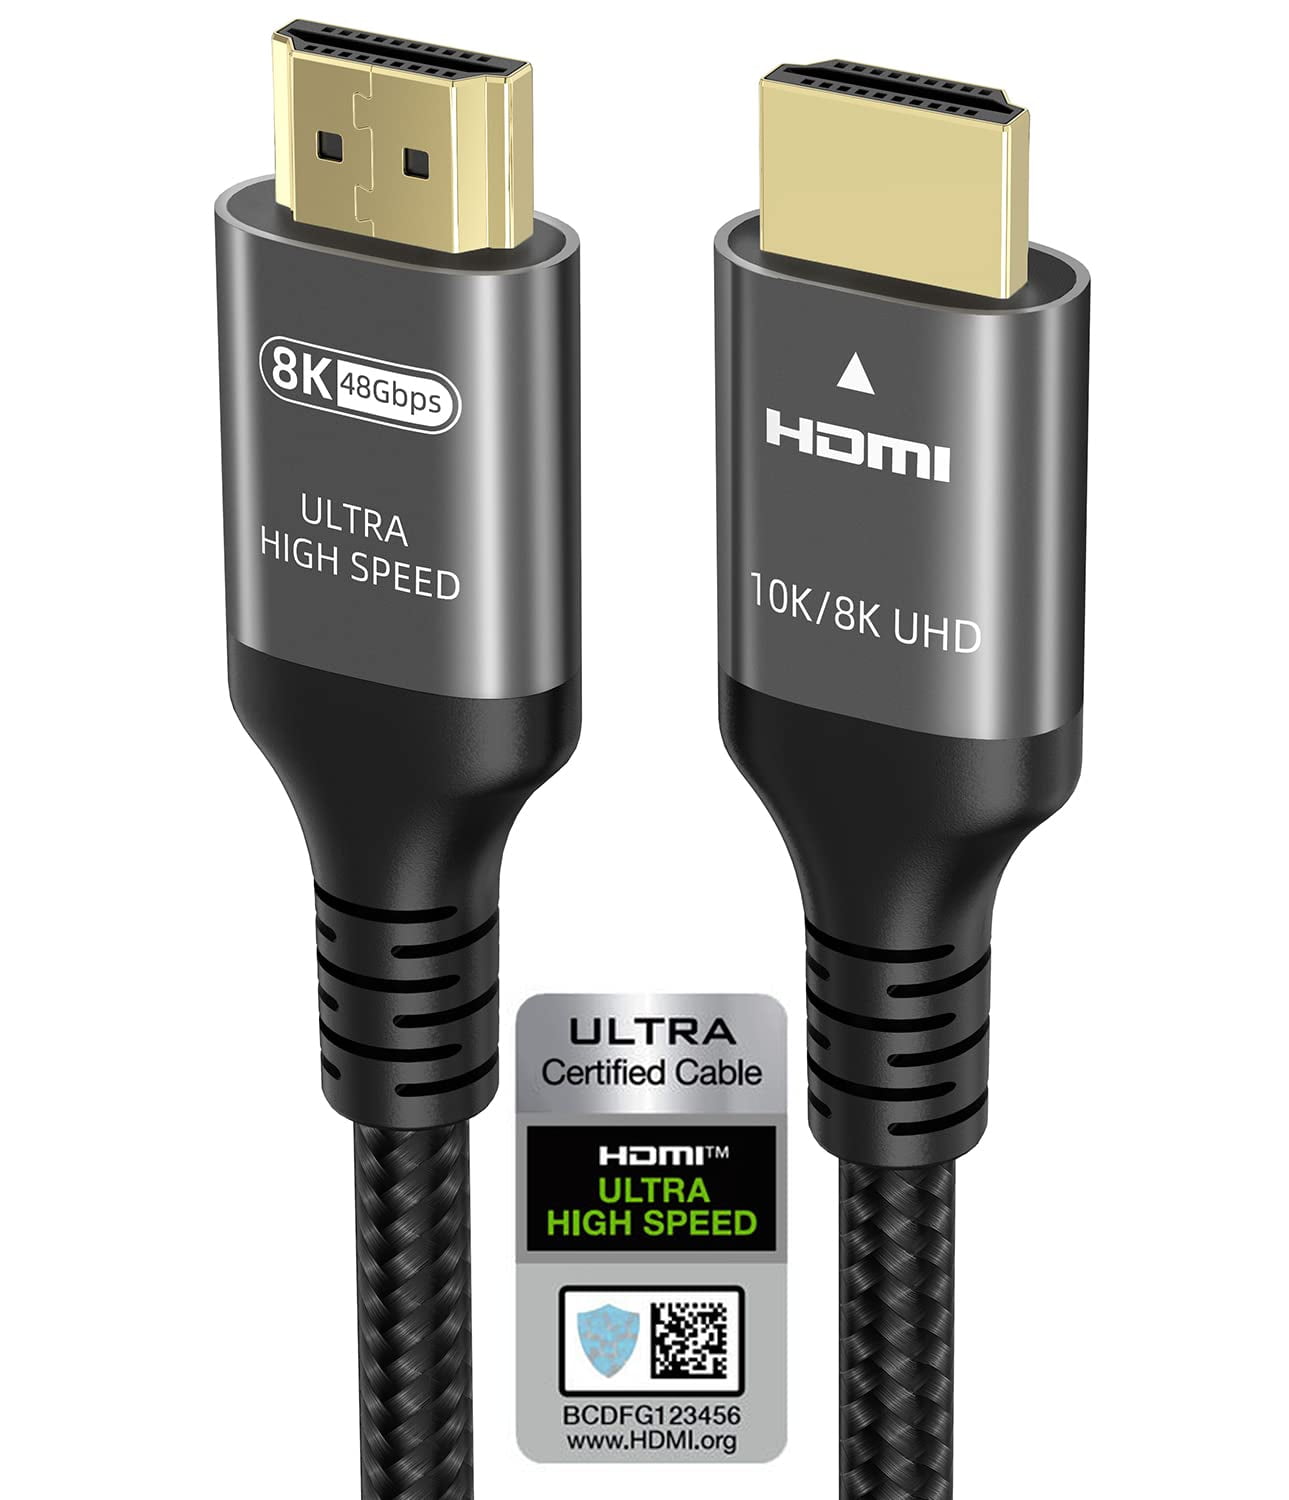 MONSTER CABLE HDMI 2.1 M3000 UHD 8K DOLBY VISION HDR 48GBPS 3M